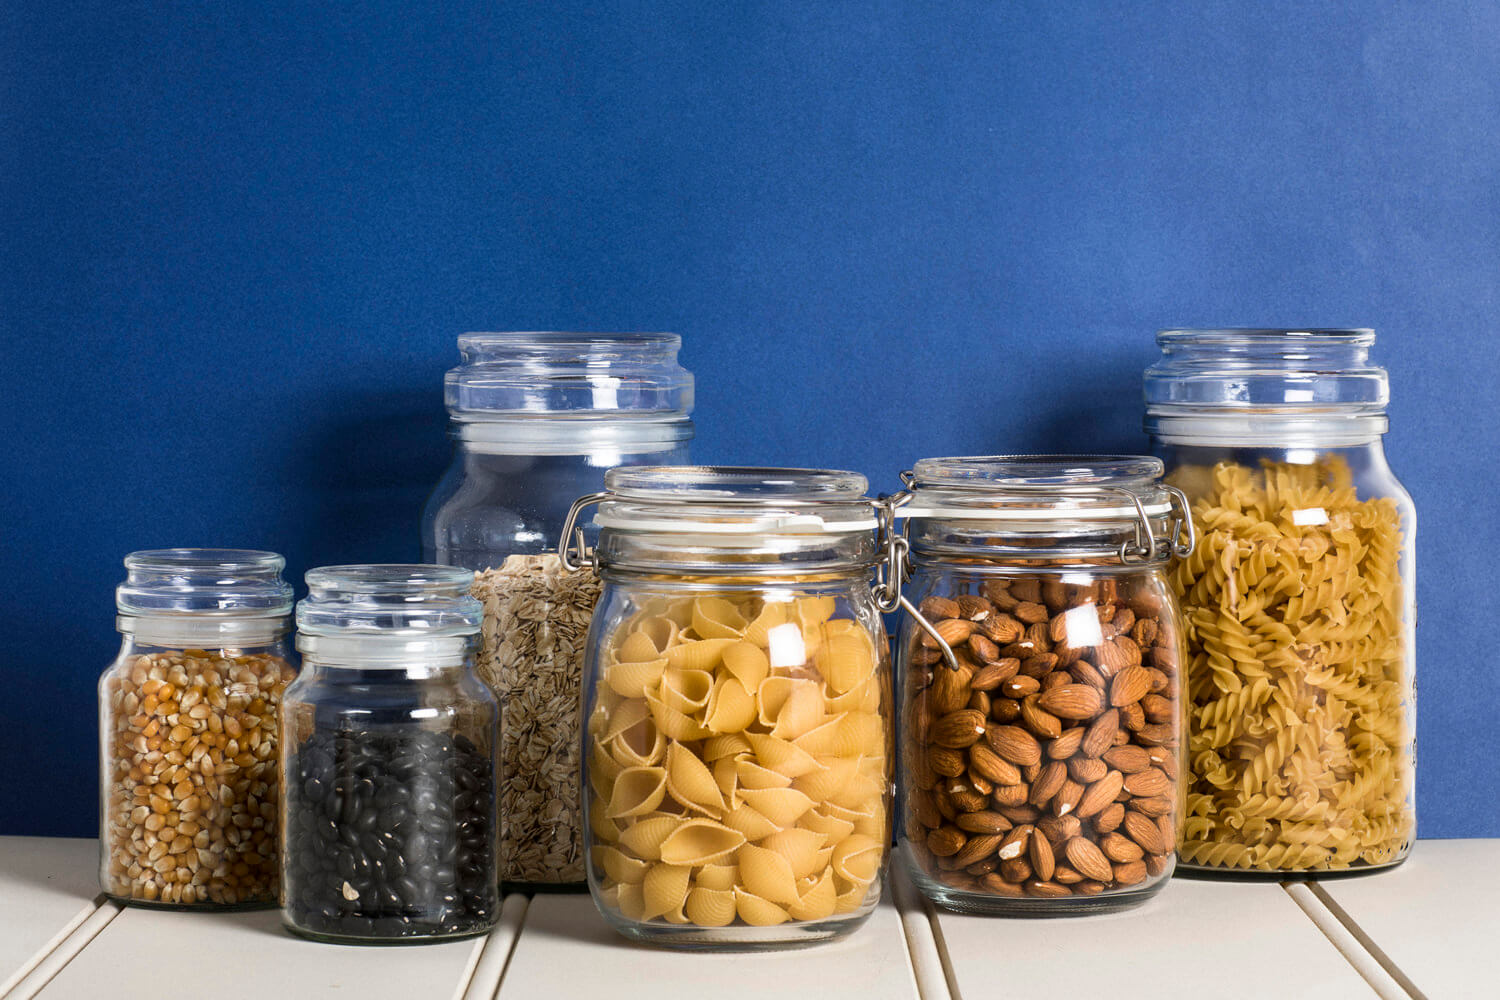 assortment of dried goods in glass jars